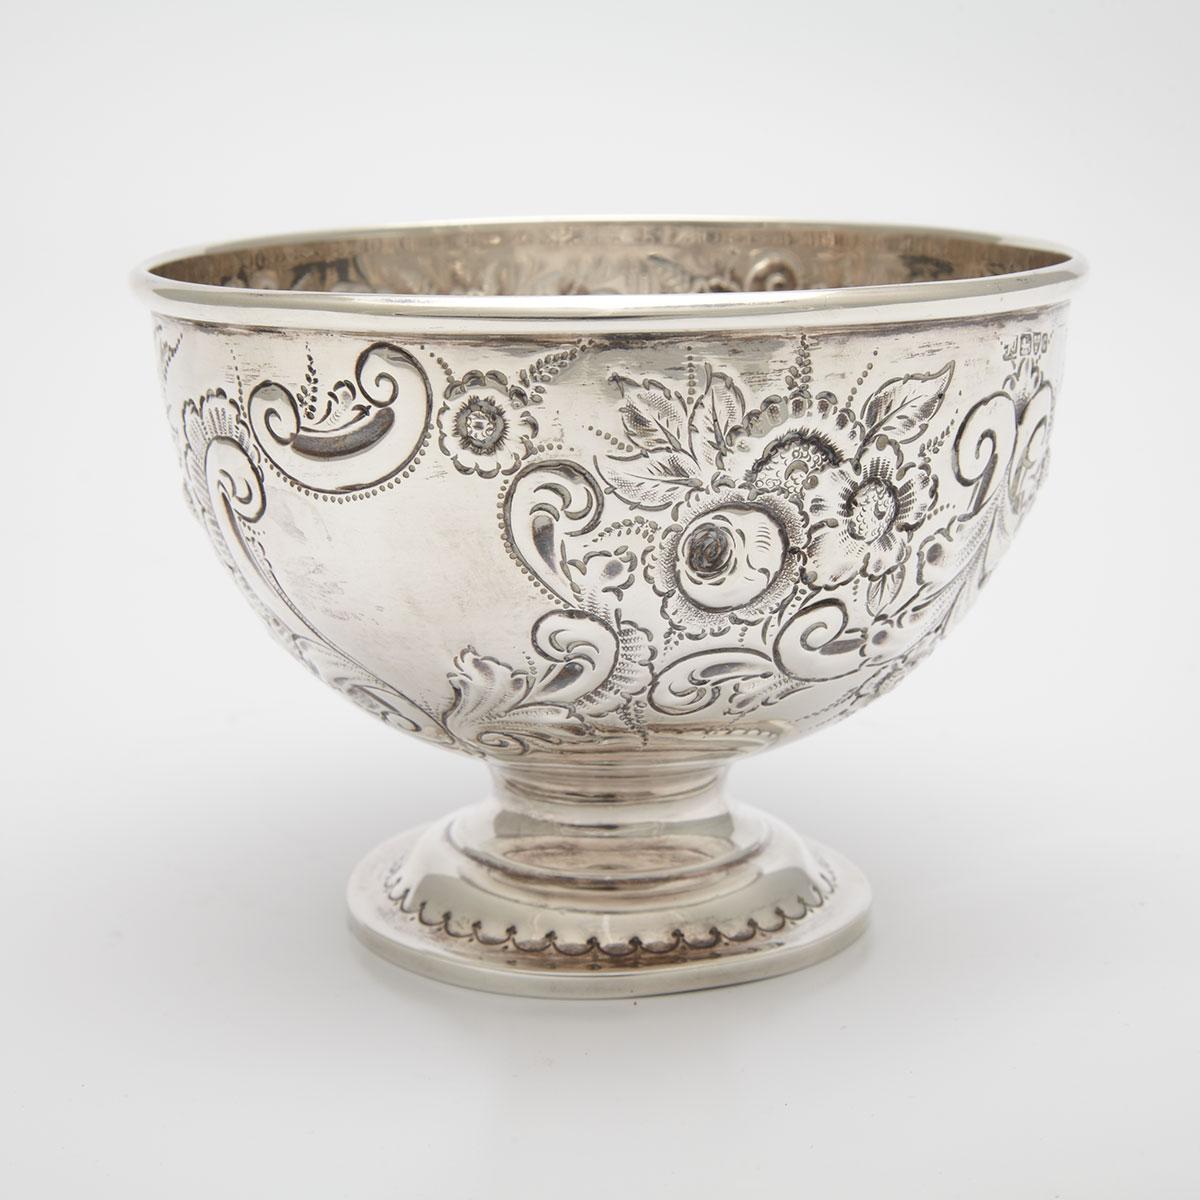 Edwardian Silver Footed Bowl, Chester, 1903